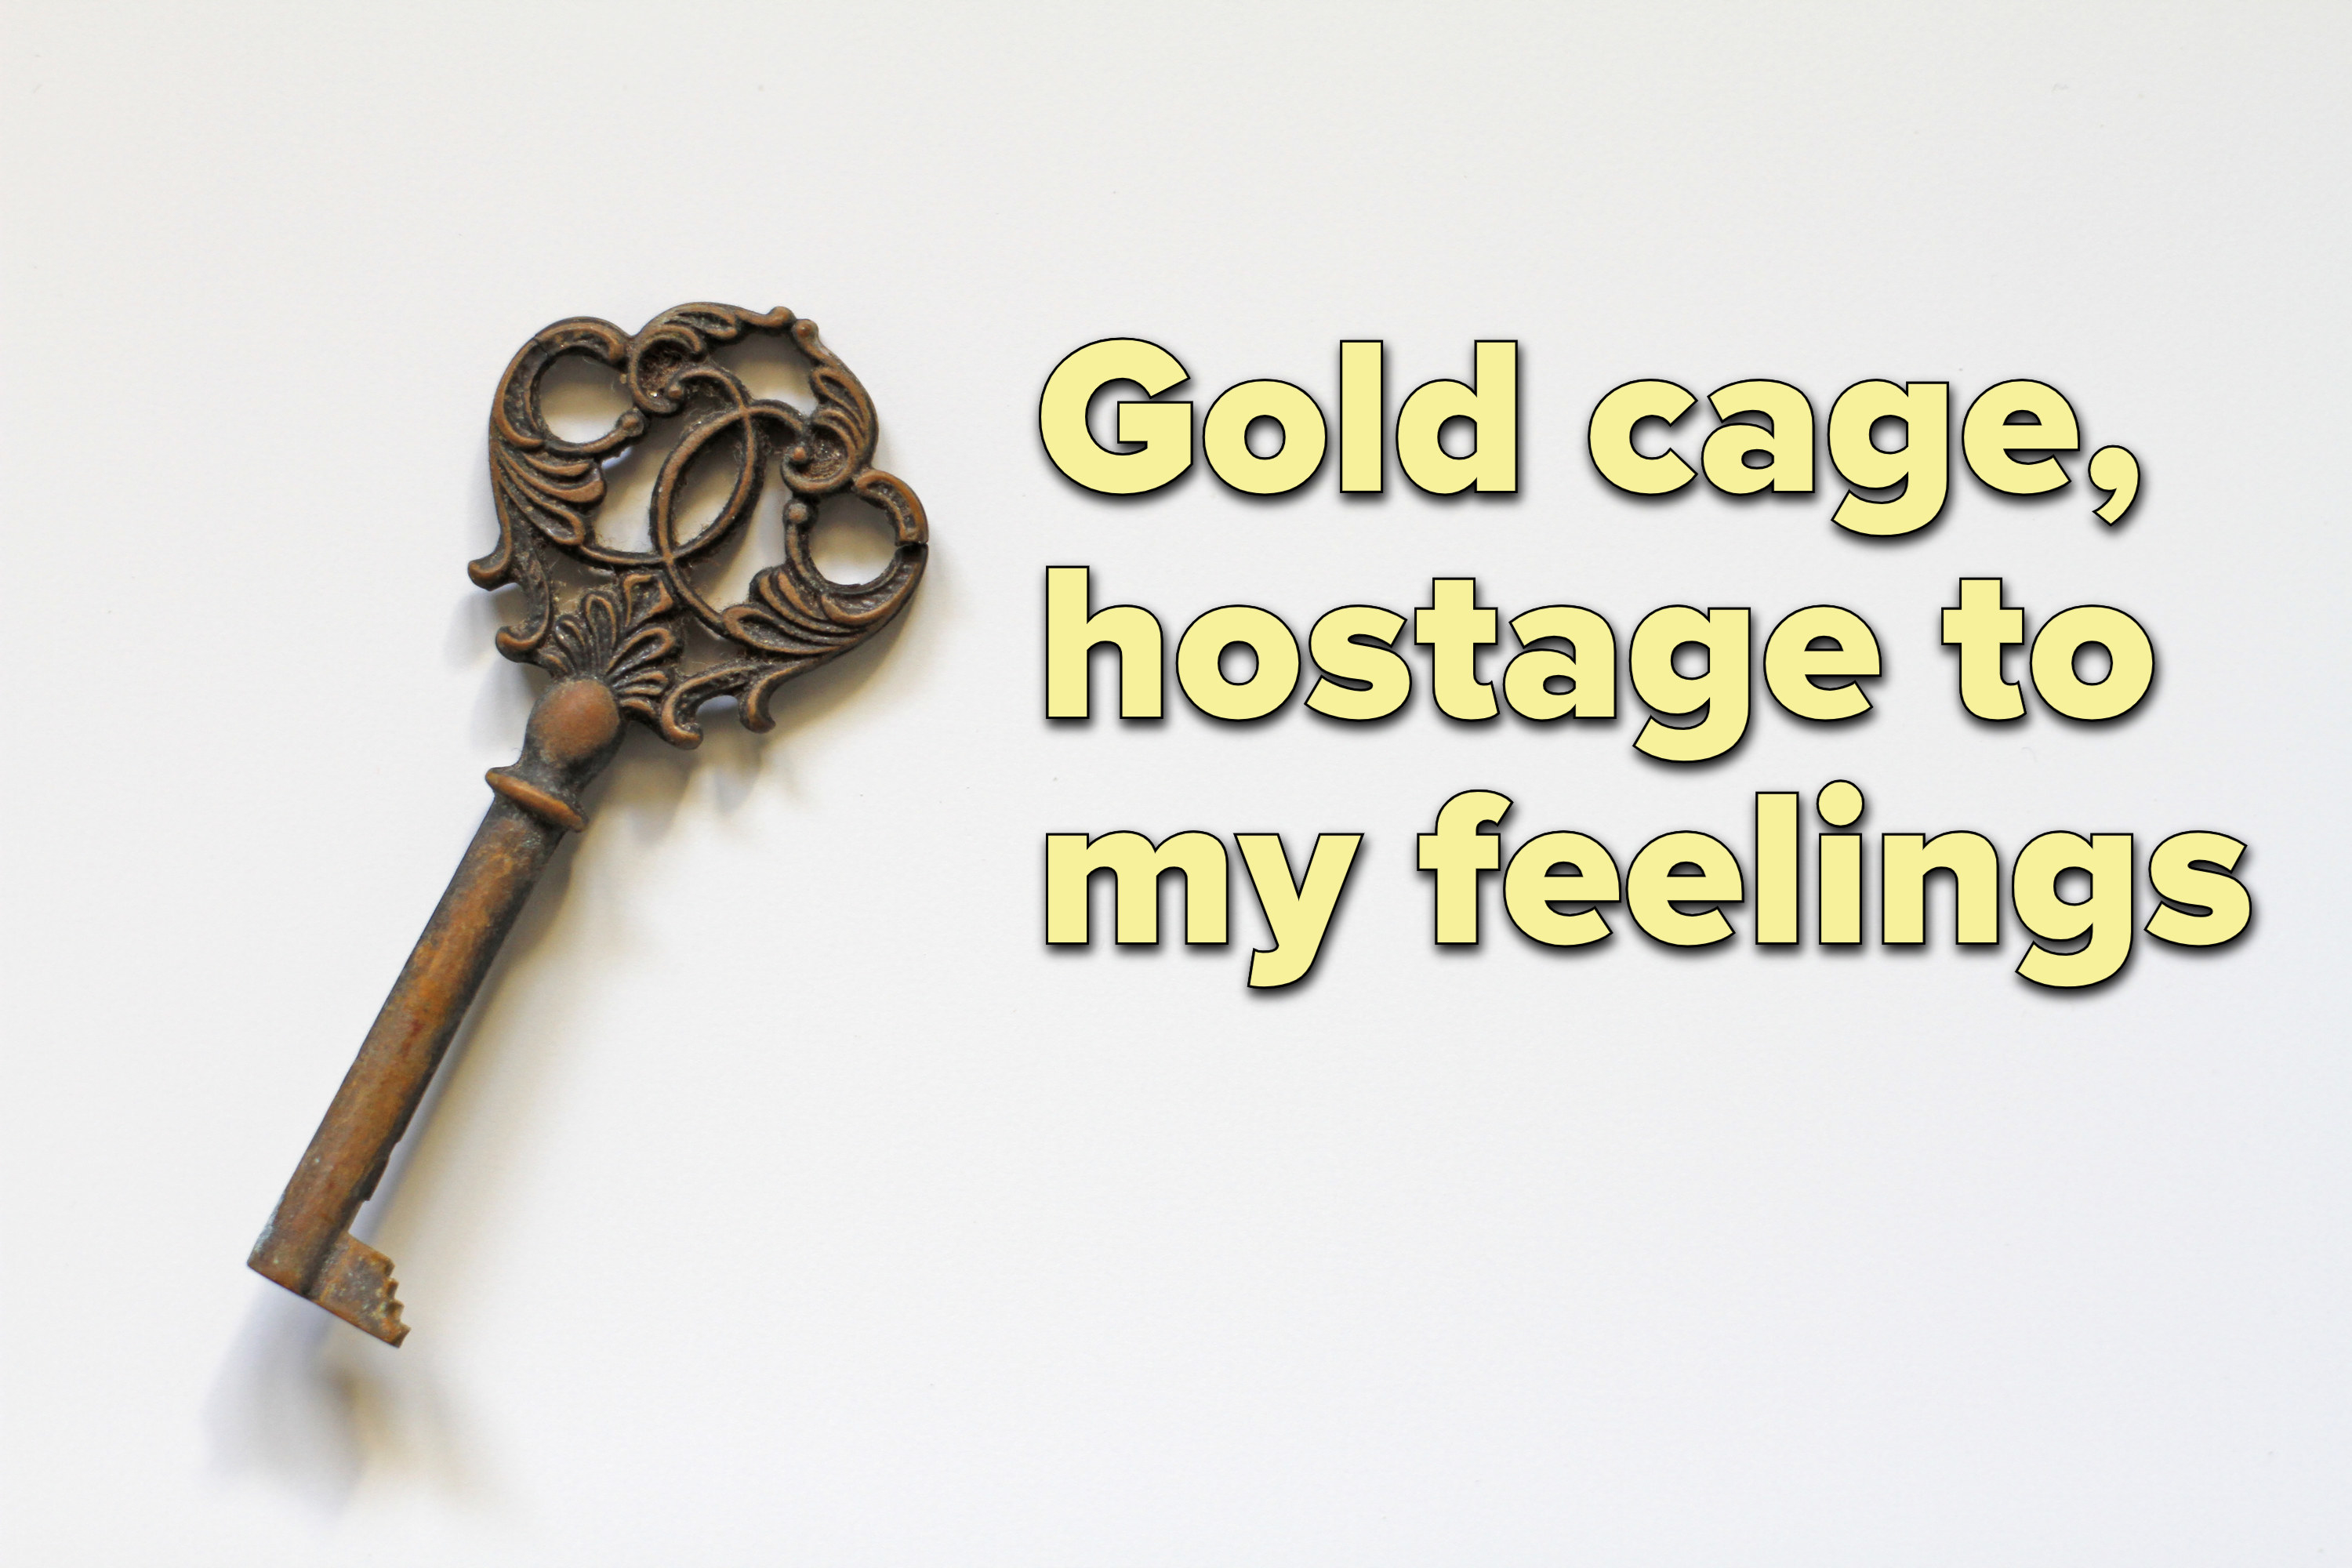 Photo of a brass key with lyrics from &quot;So It Goes...&quot; by Taylor Swift in text